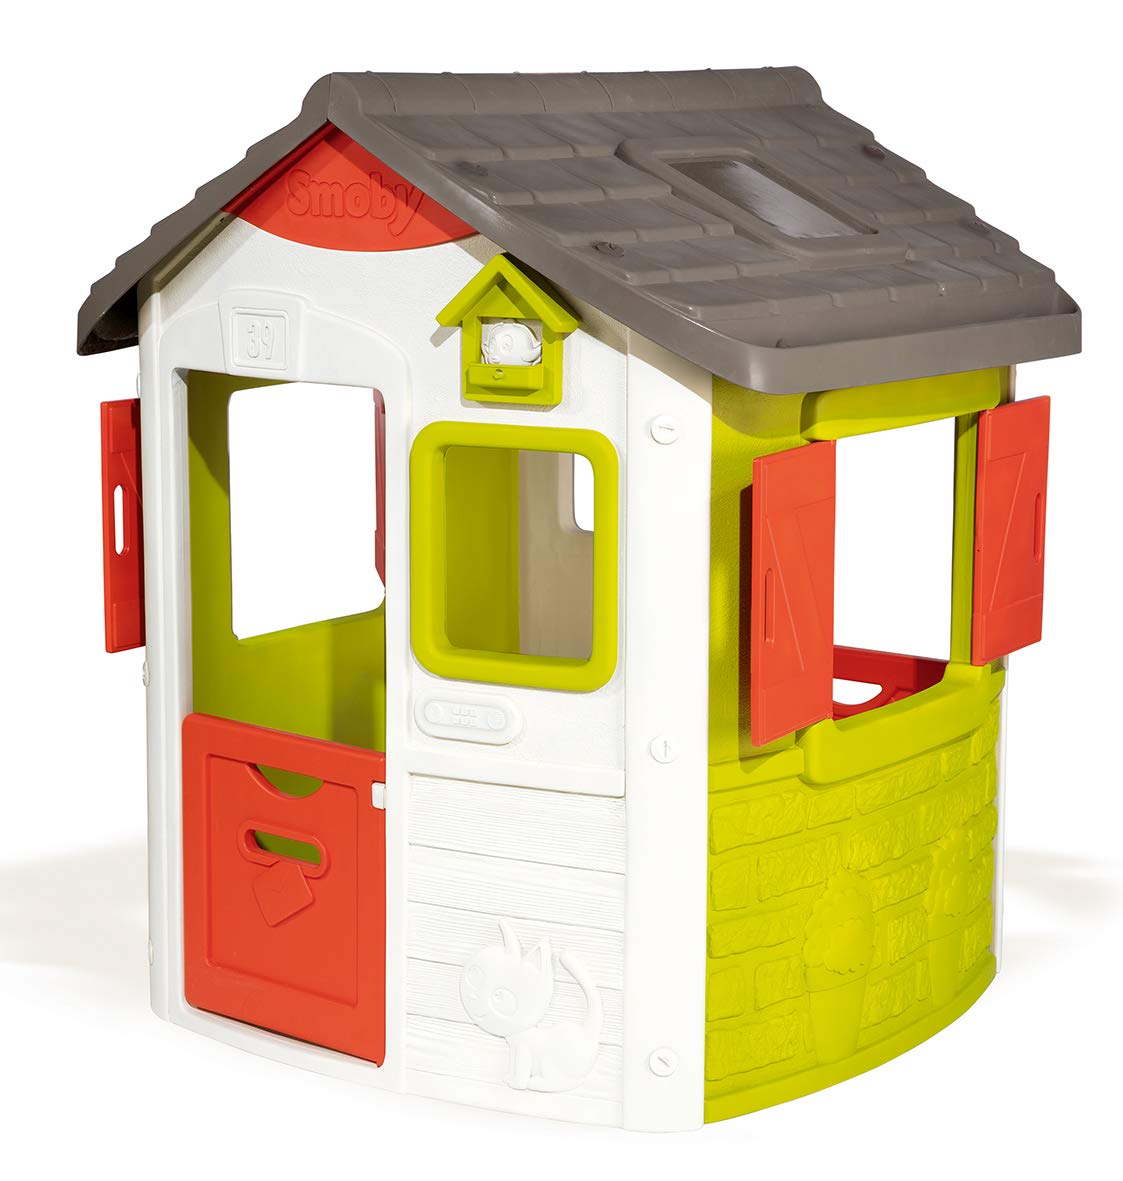 Smoby 810500 Neo Jura Lodge Childrens Playhouse Indoor And Outdoor, Garden 